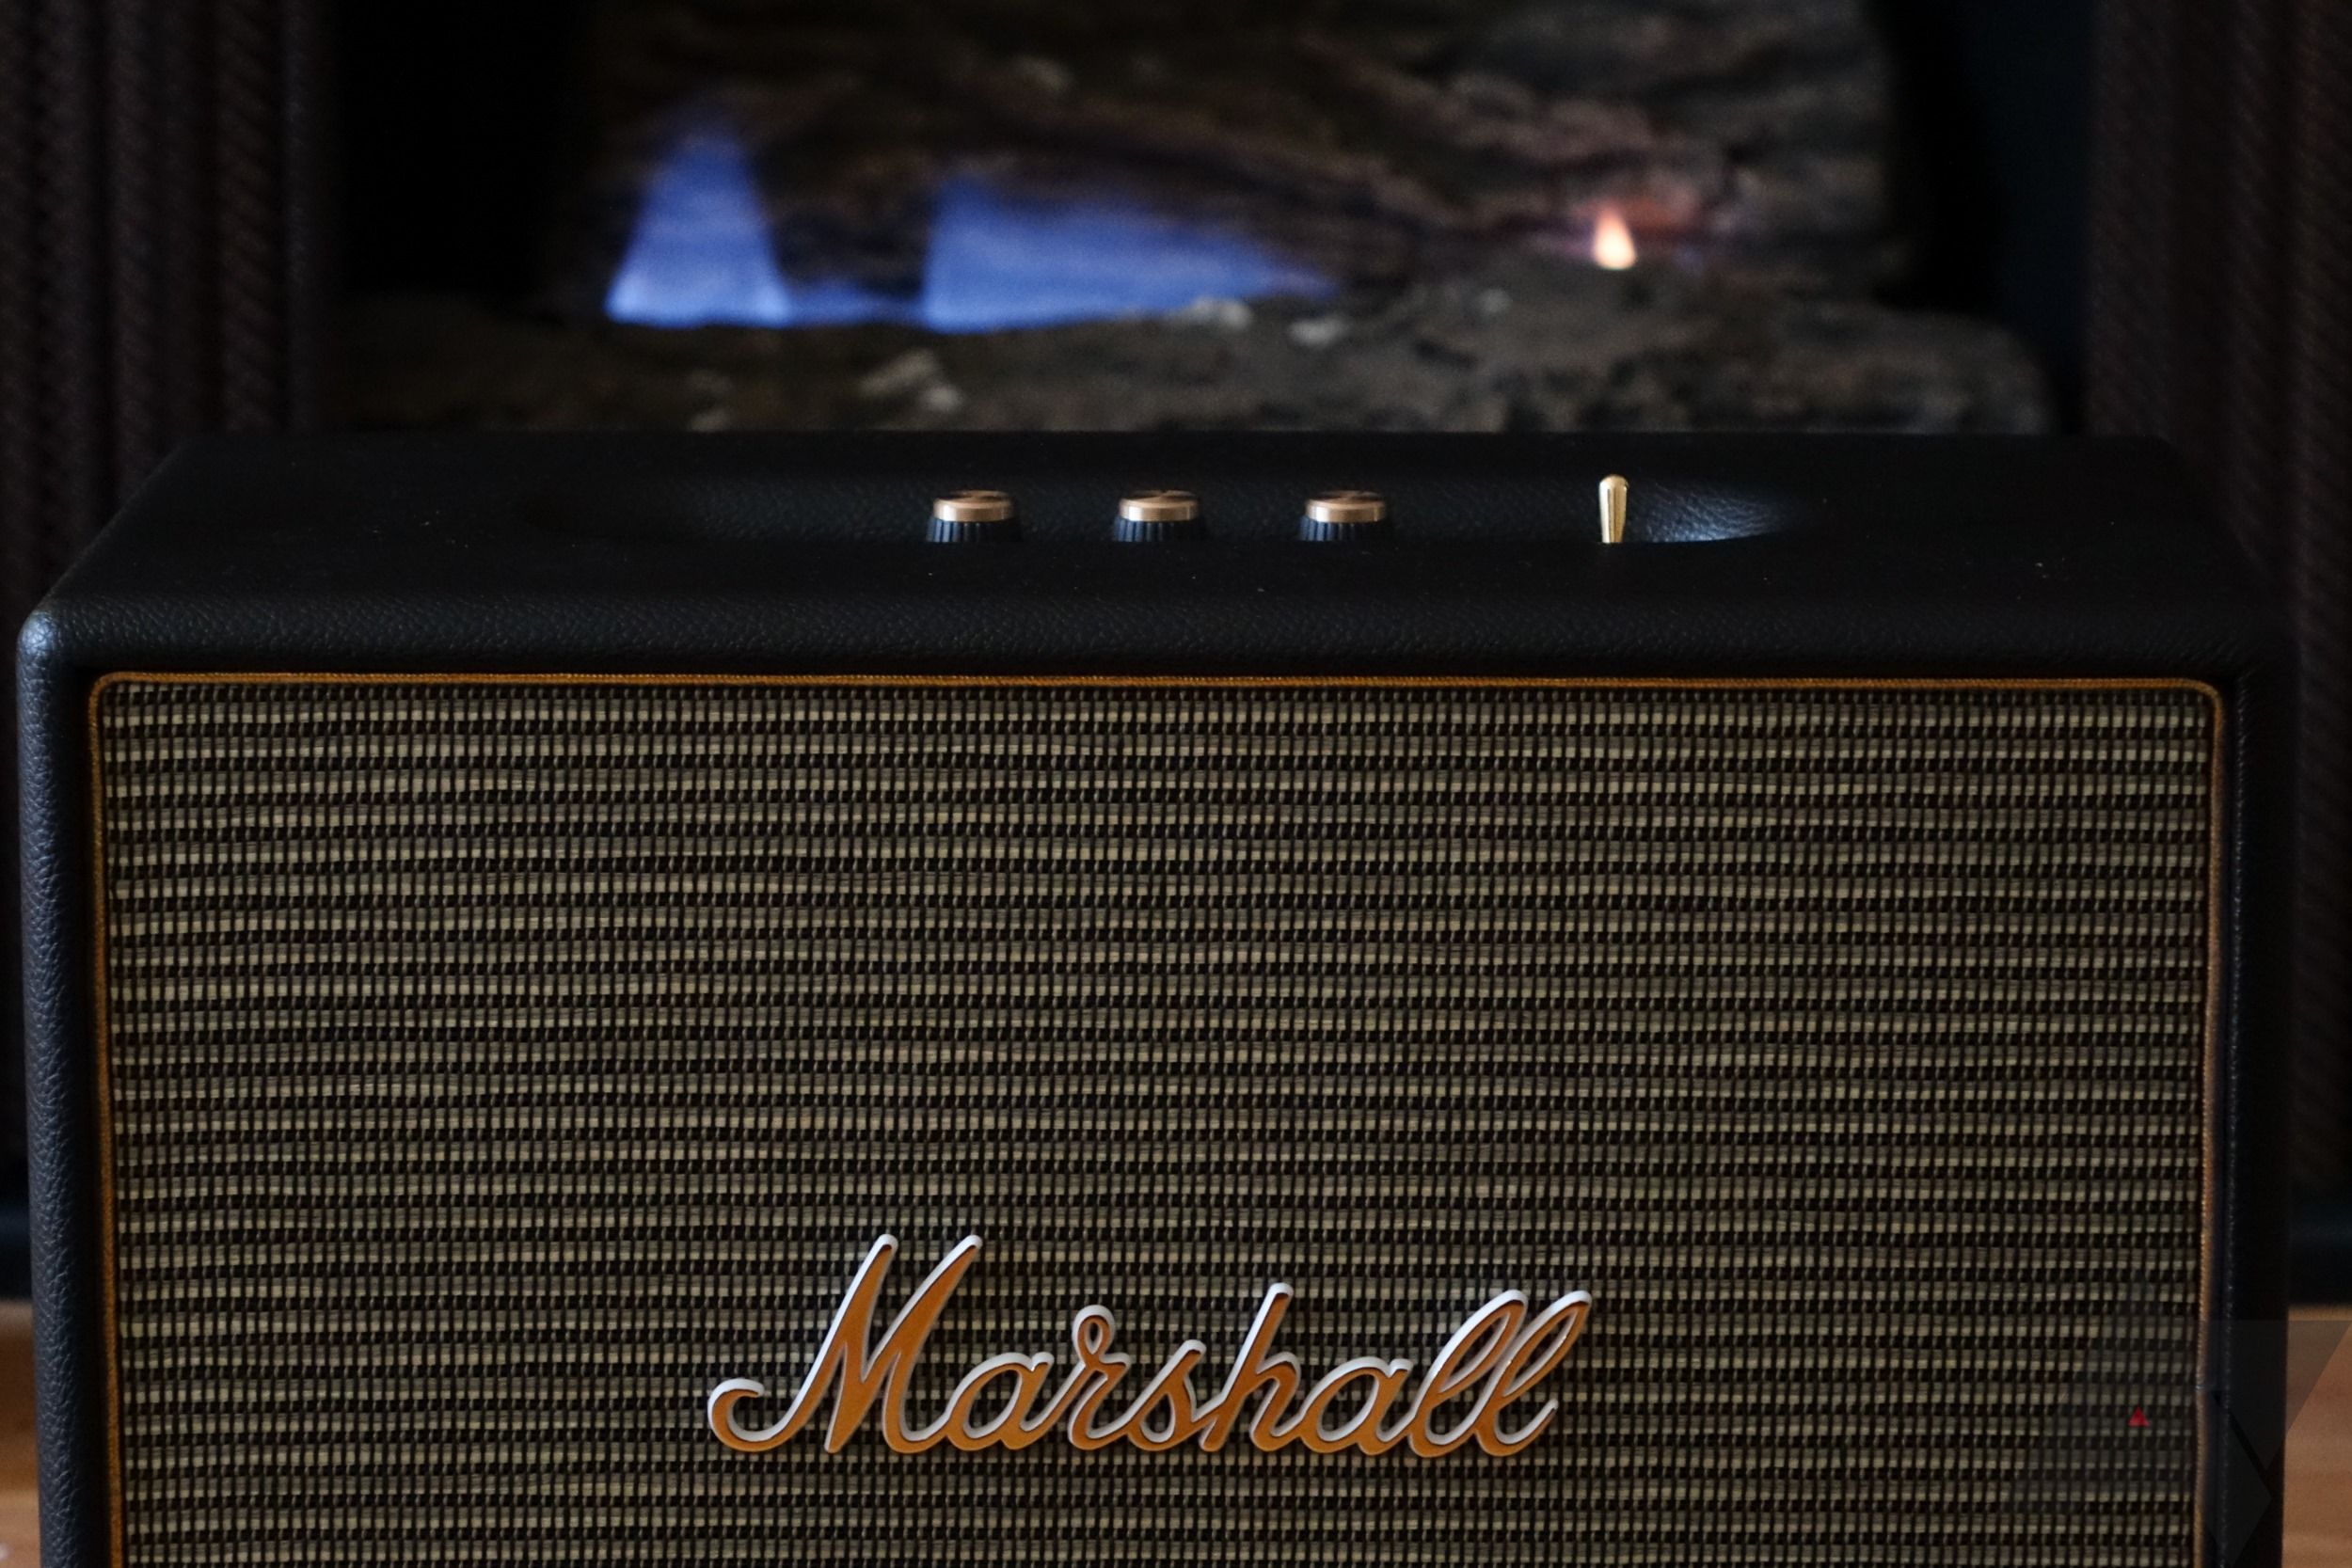 Marshall Woburn 3 Review  Makes Music Alive 